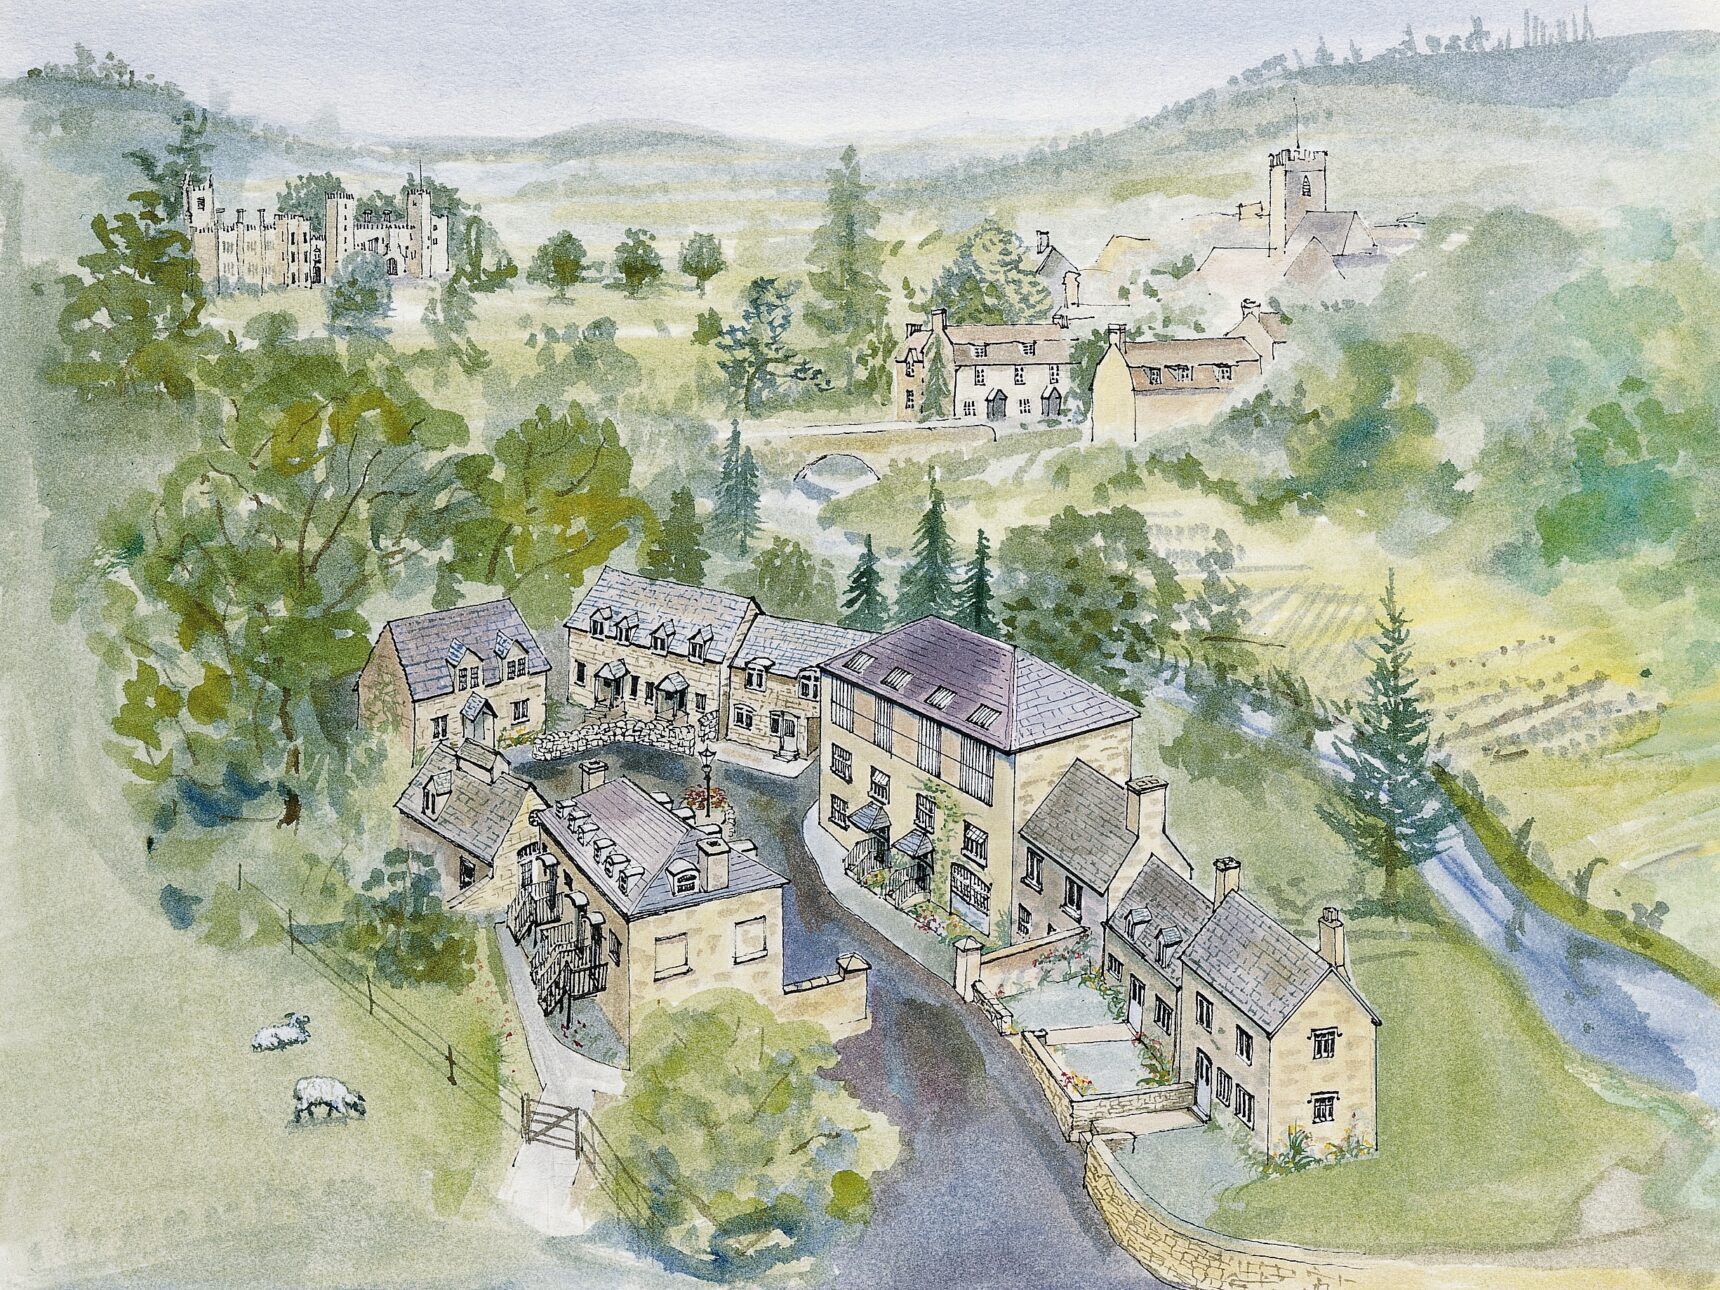 A collection of Cotswolds Cottages can be found on the estate